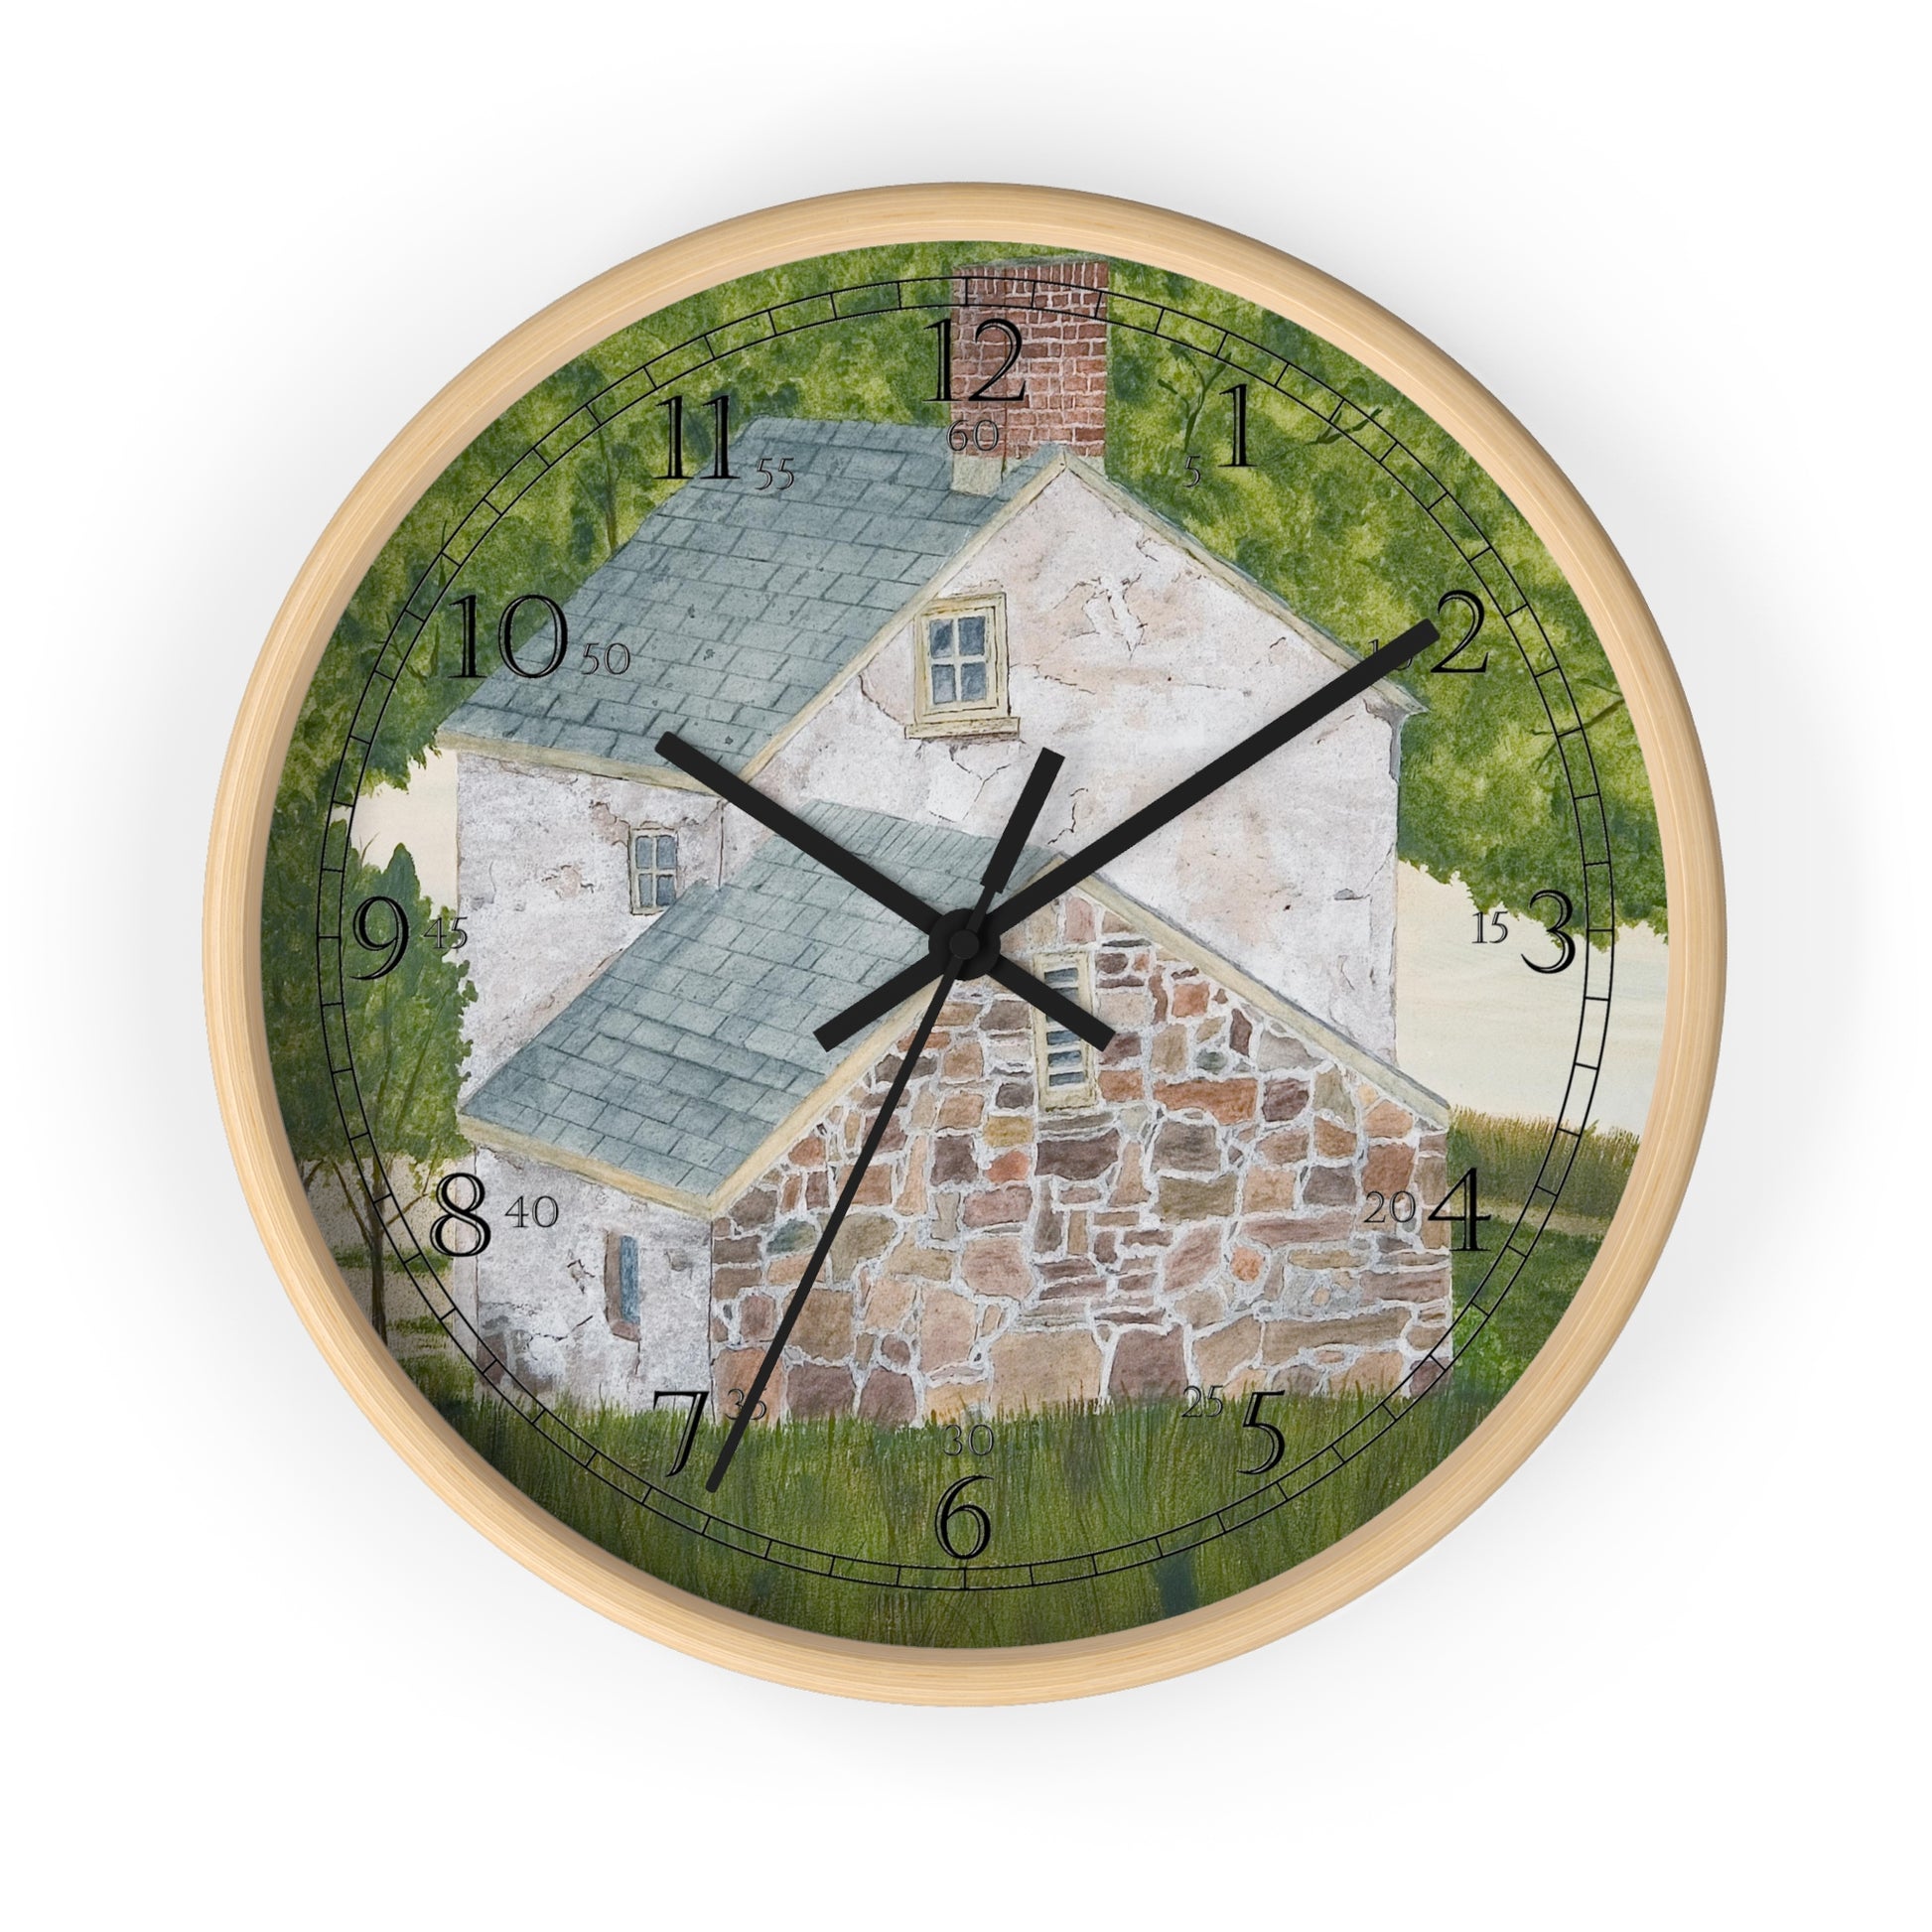 The Manor House By The Glen captures the spirit of an old farmhouse nestled in the trees in Pennsylvania’s Washington Crossing State Park. This restful scene reflects the feeling of Spring in the country. You'll enjoy the peaceful scene on this clock whenever you look at it.   The country scene shown in the clock is a reproduction of an original watercolor by Lee M. Buchanan.